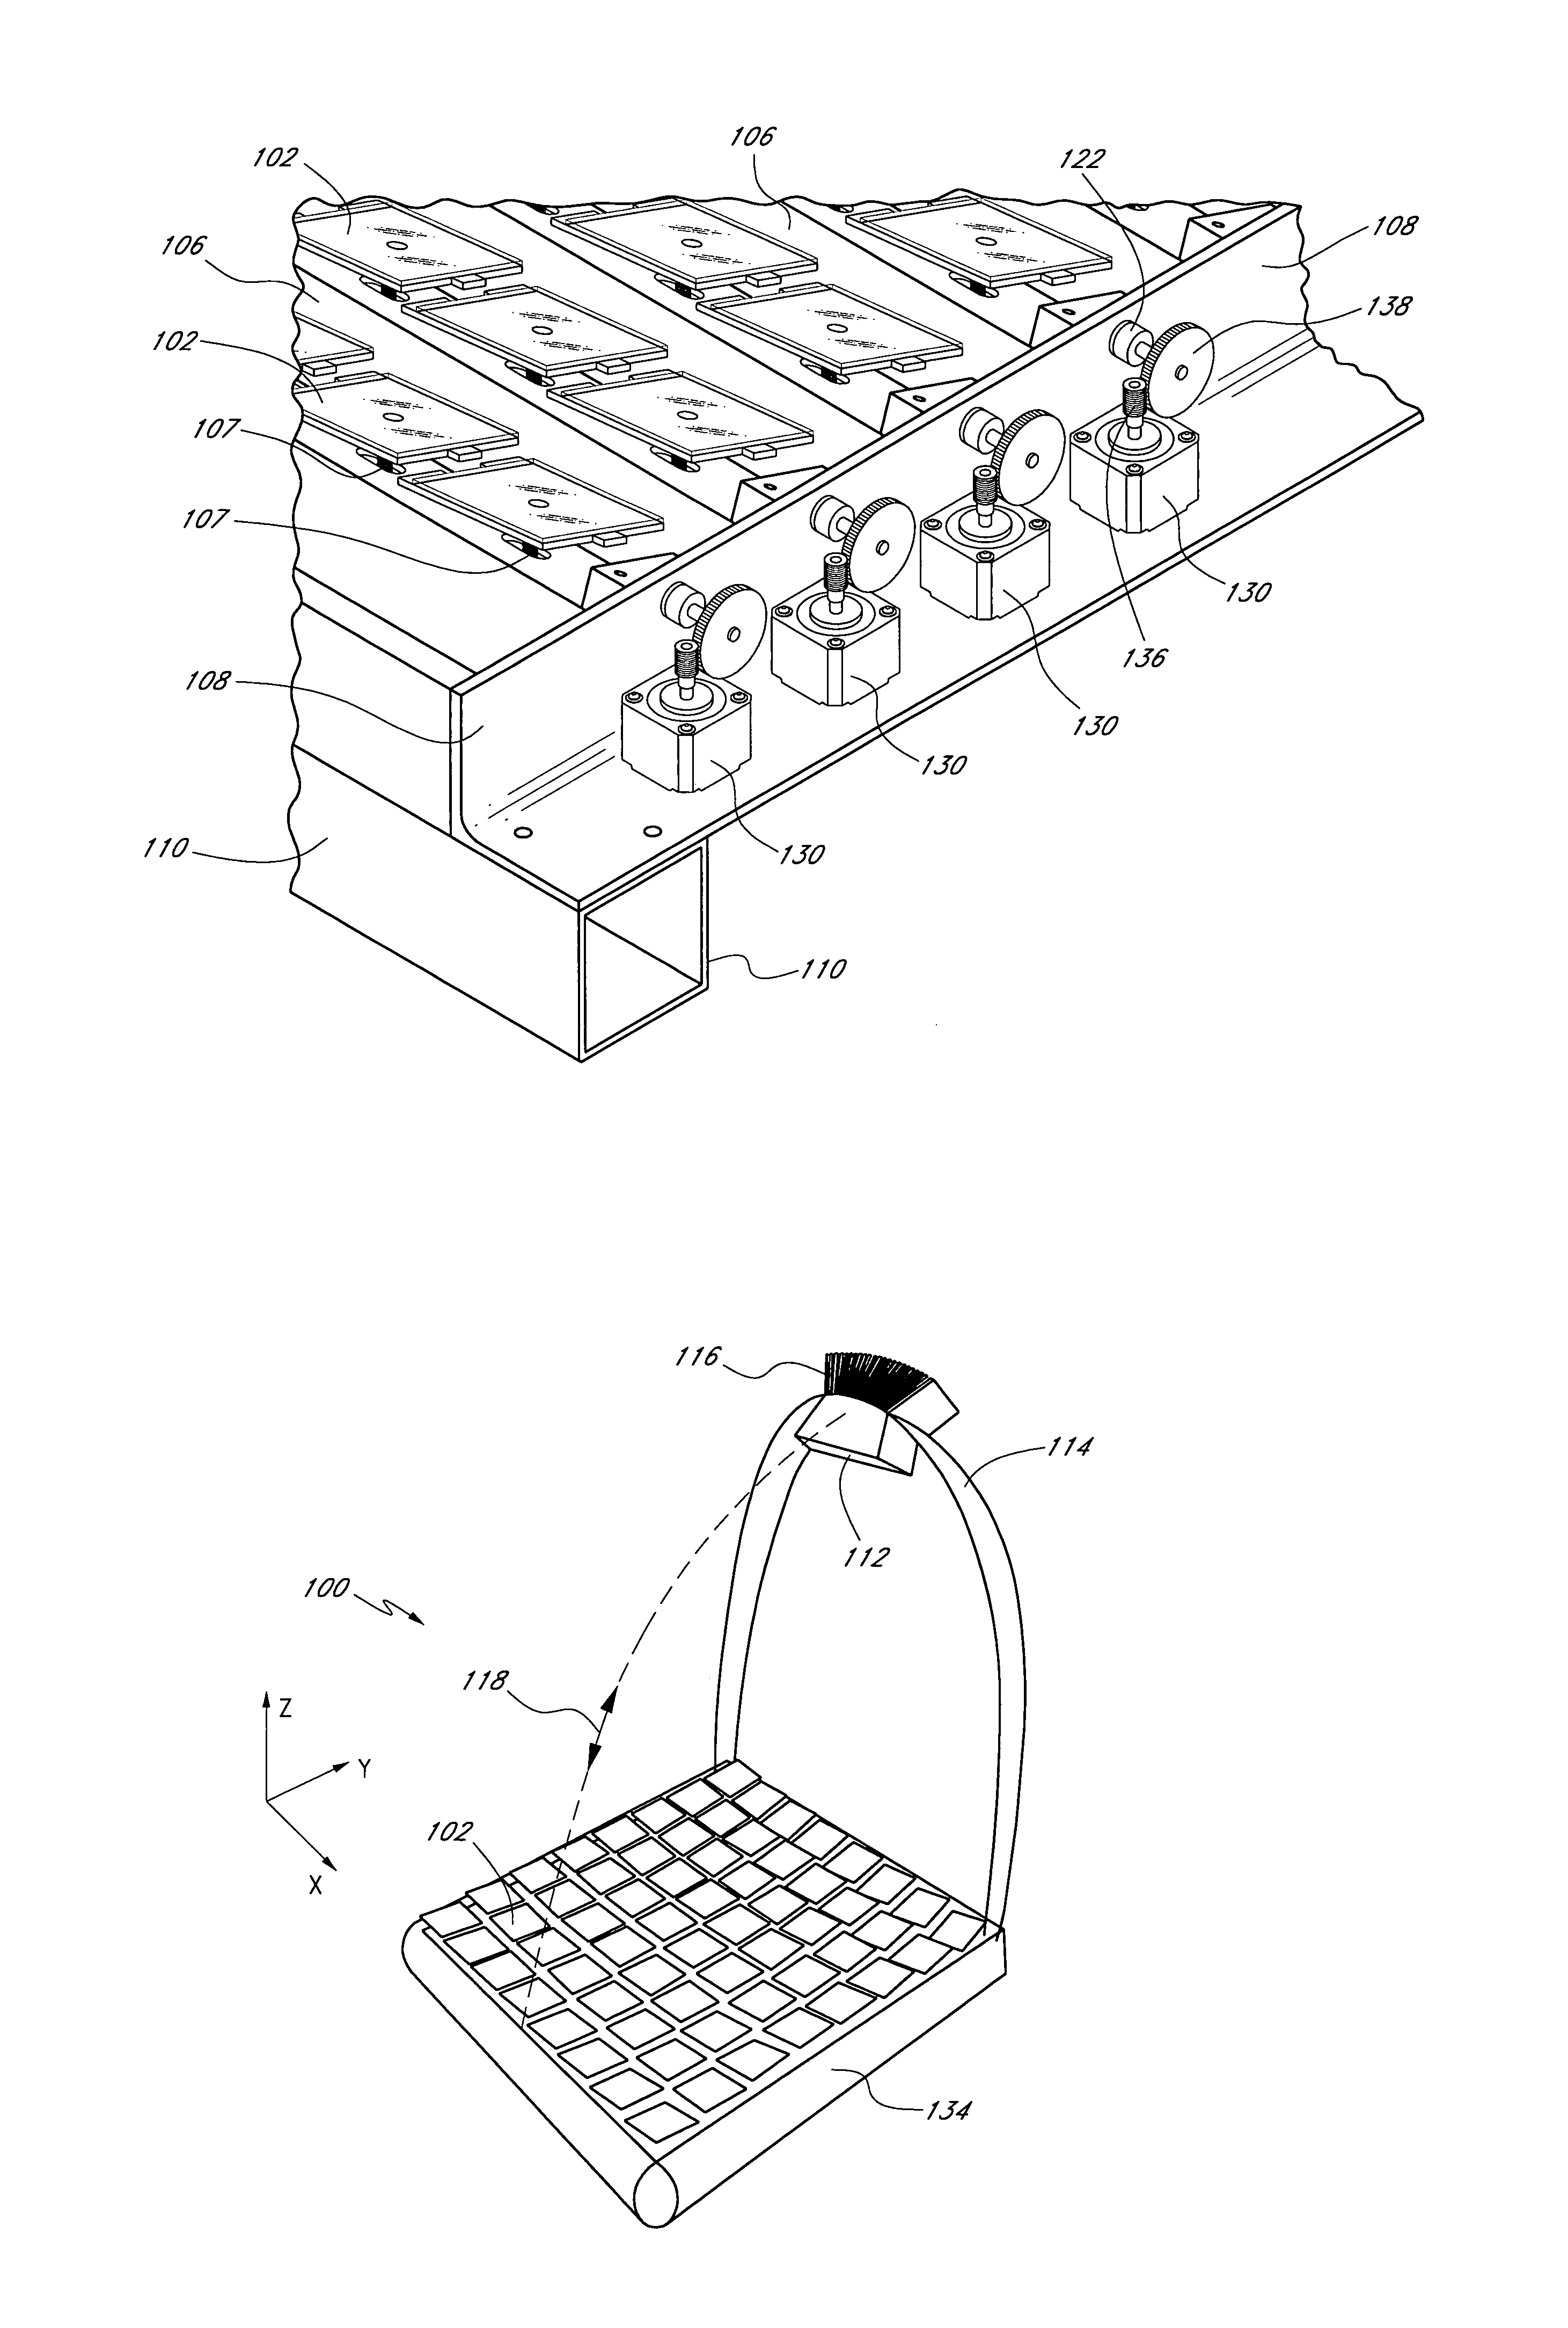 Solar concentrator array with grouped adjustable elements